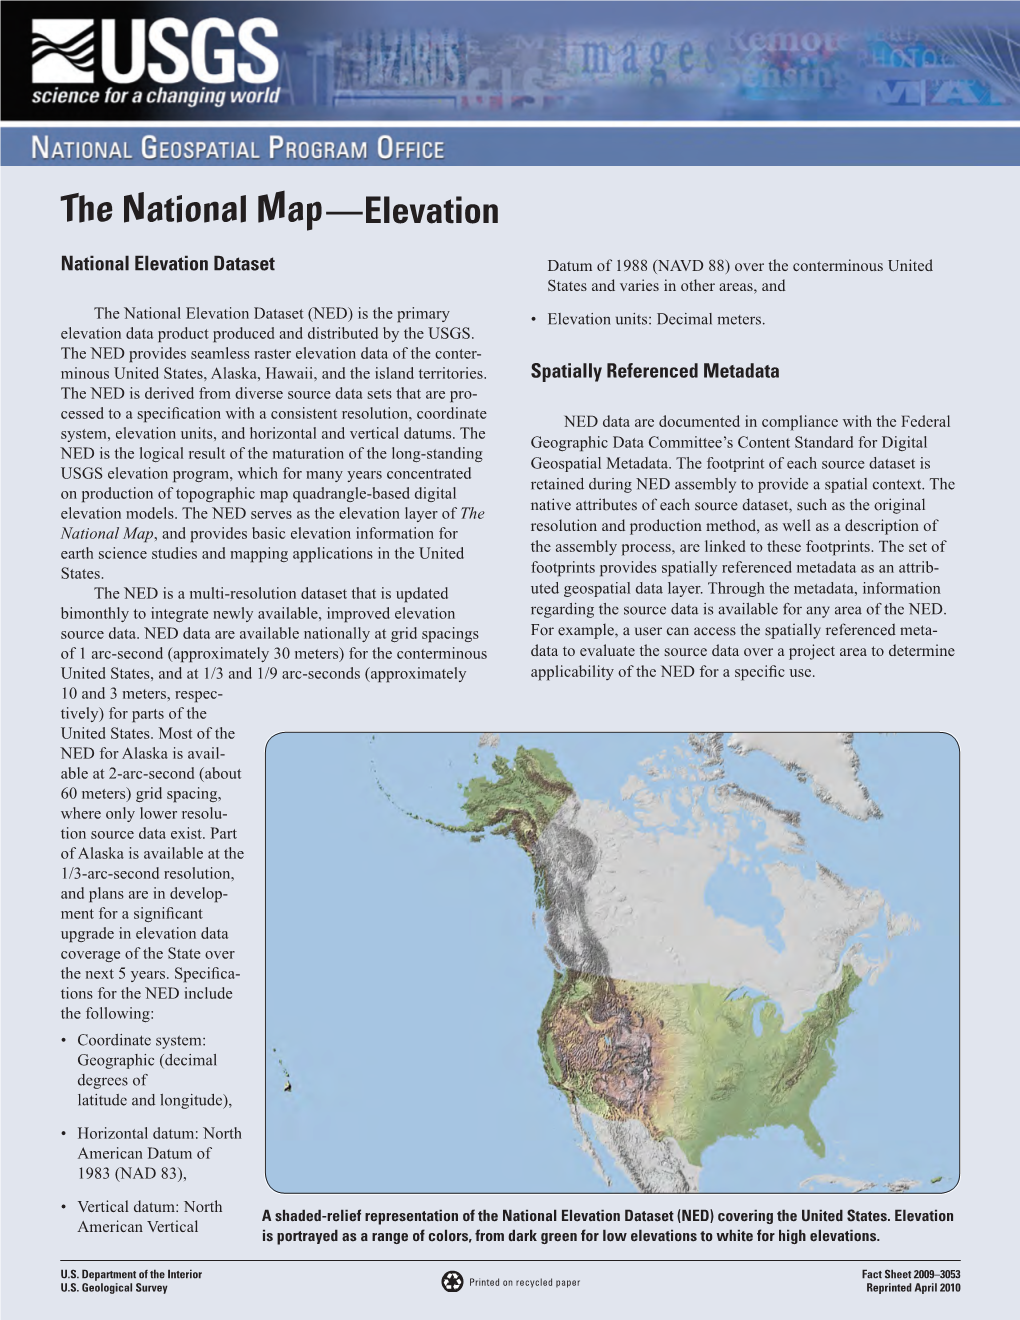 The National Map—Elevation